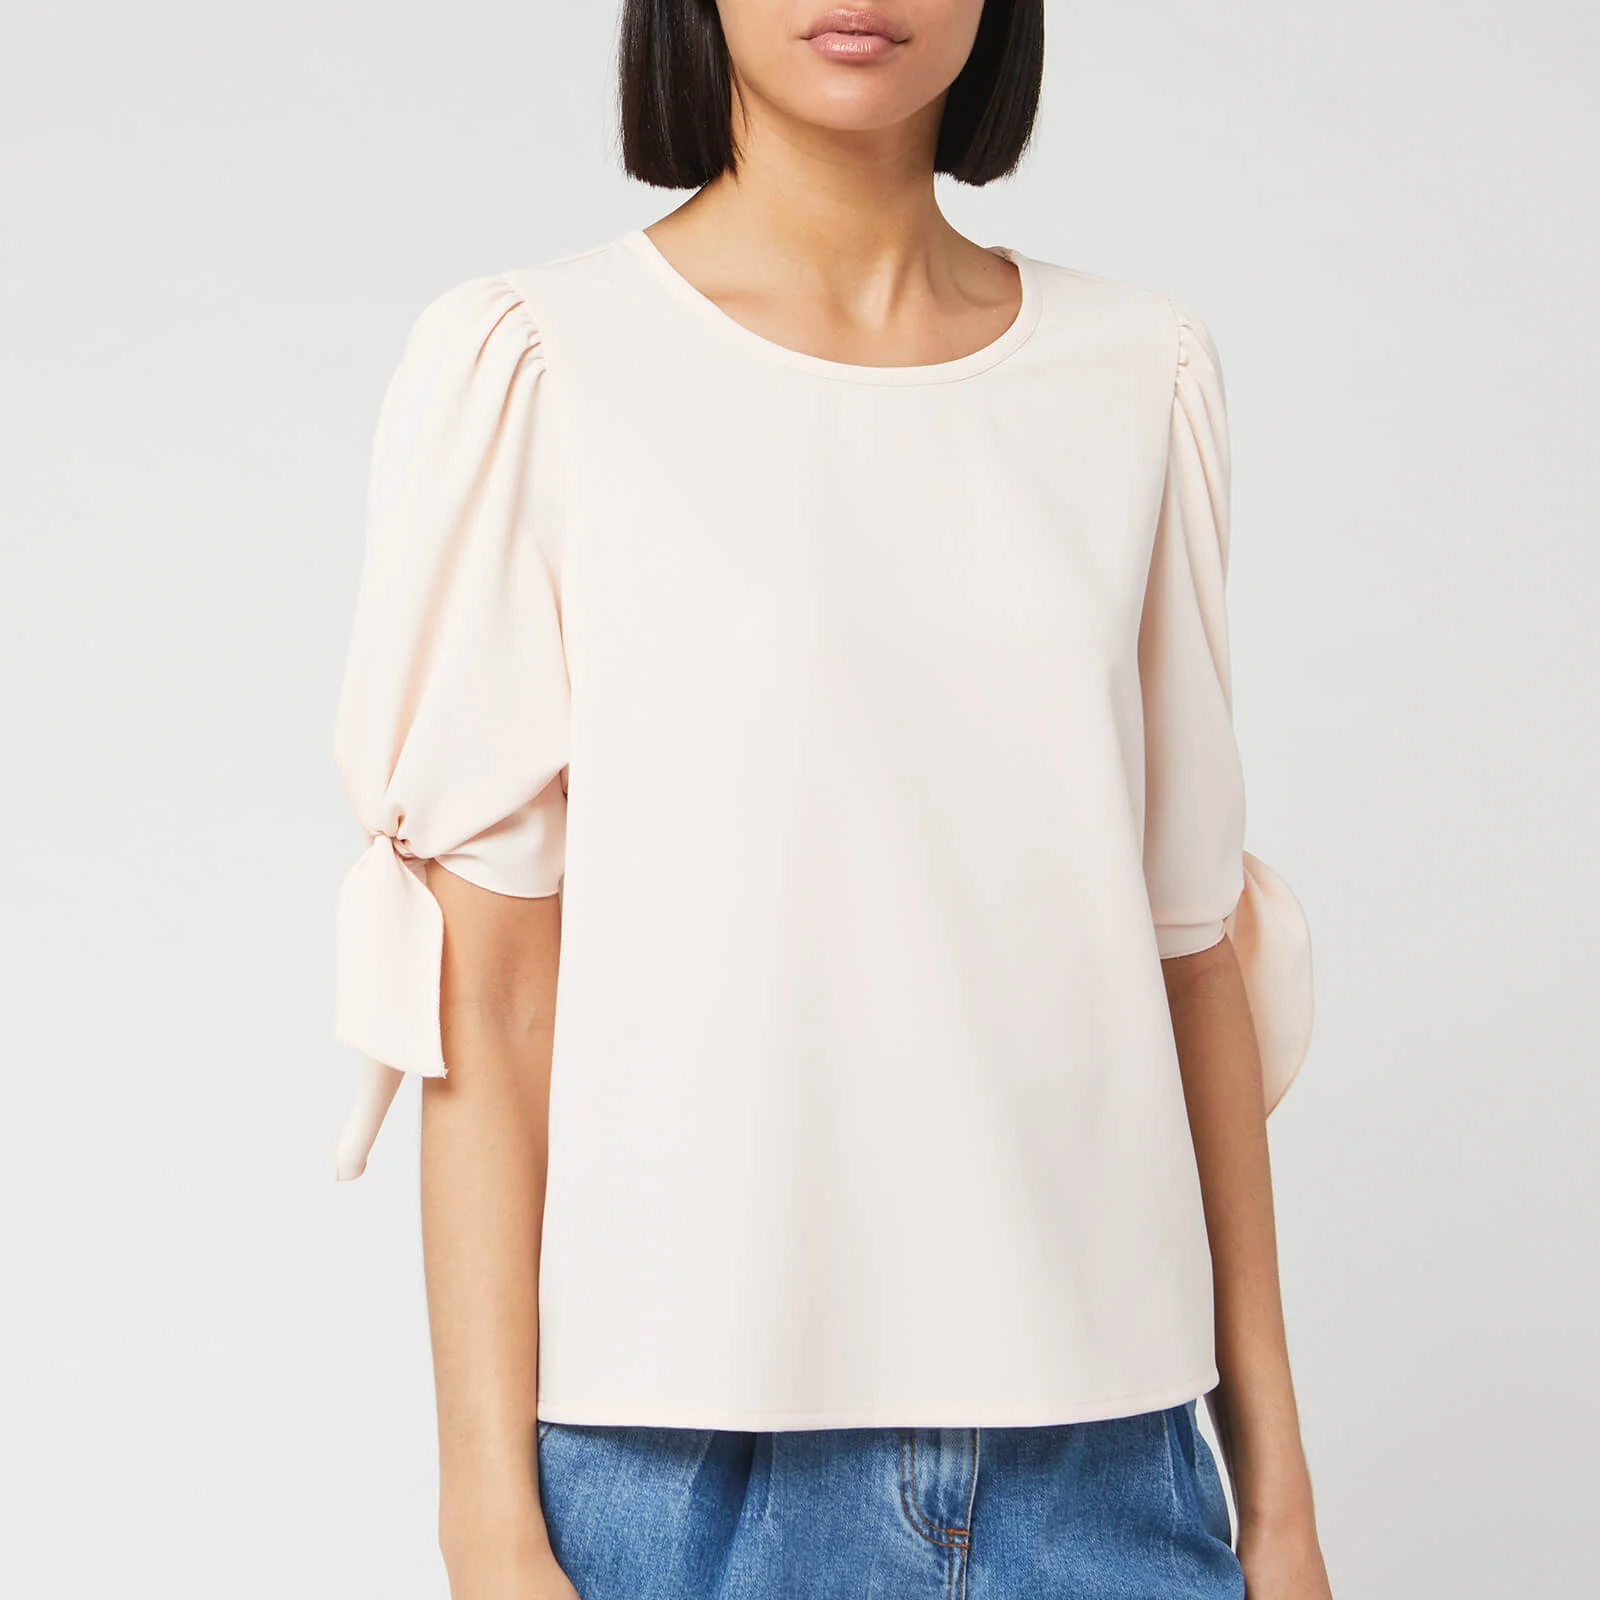 See By Chloé Women's Tie Sleeve Blouse - Pink Sand Image 1